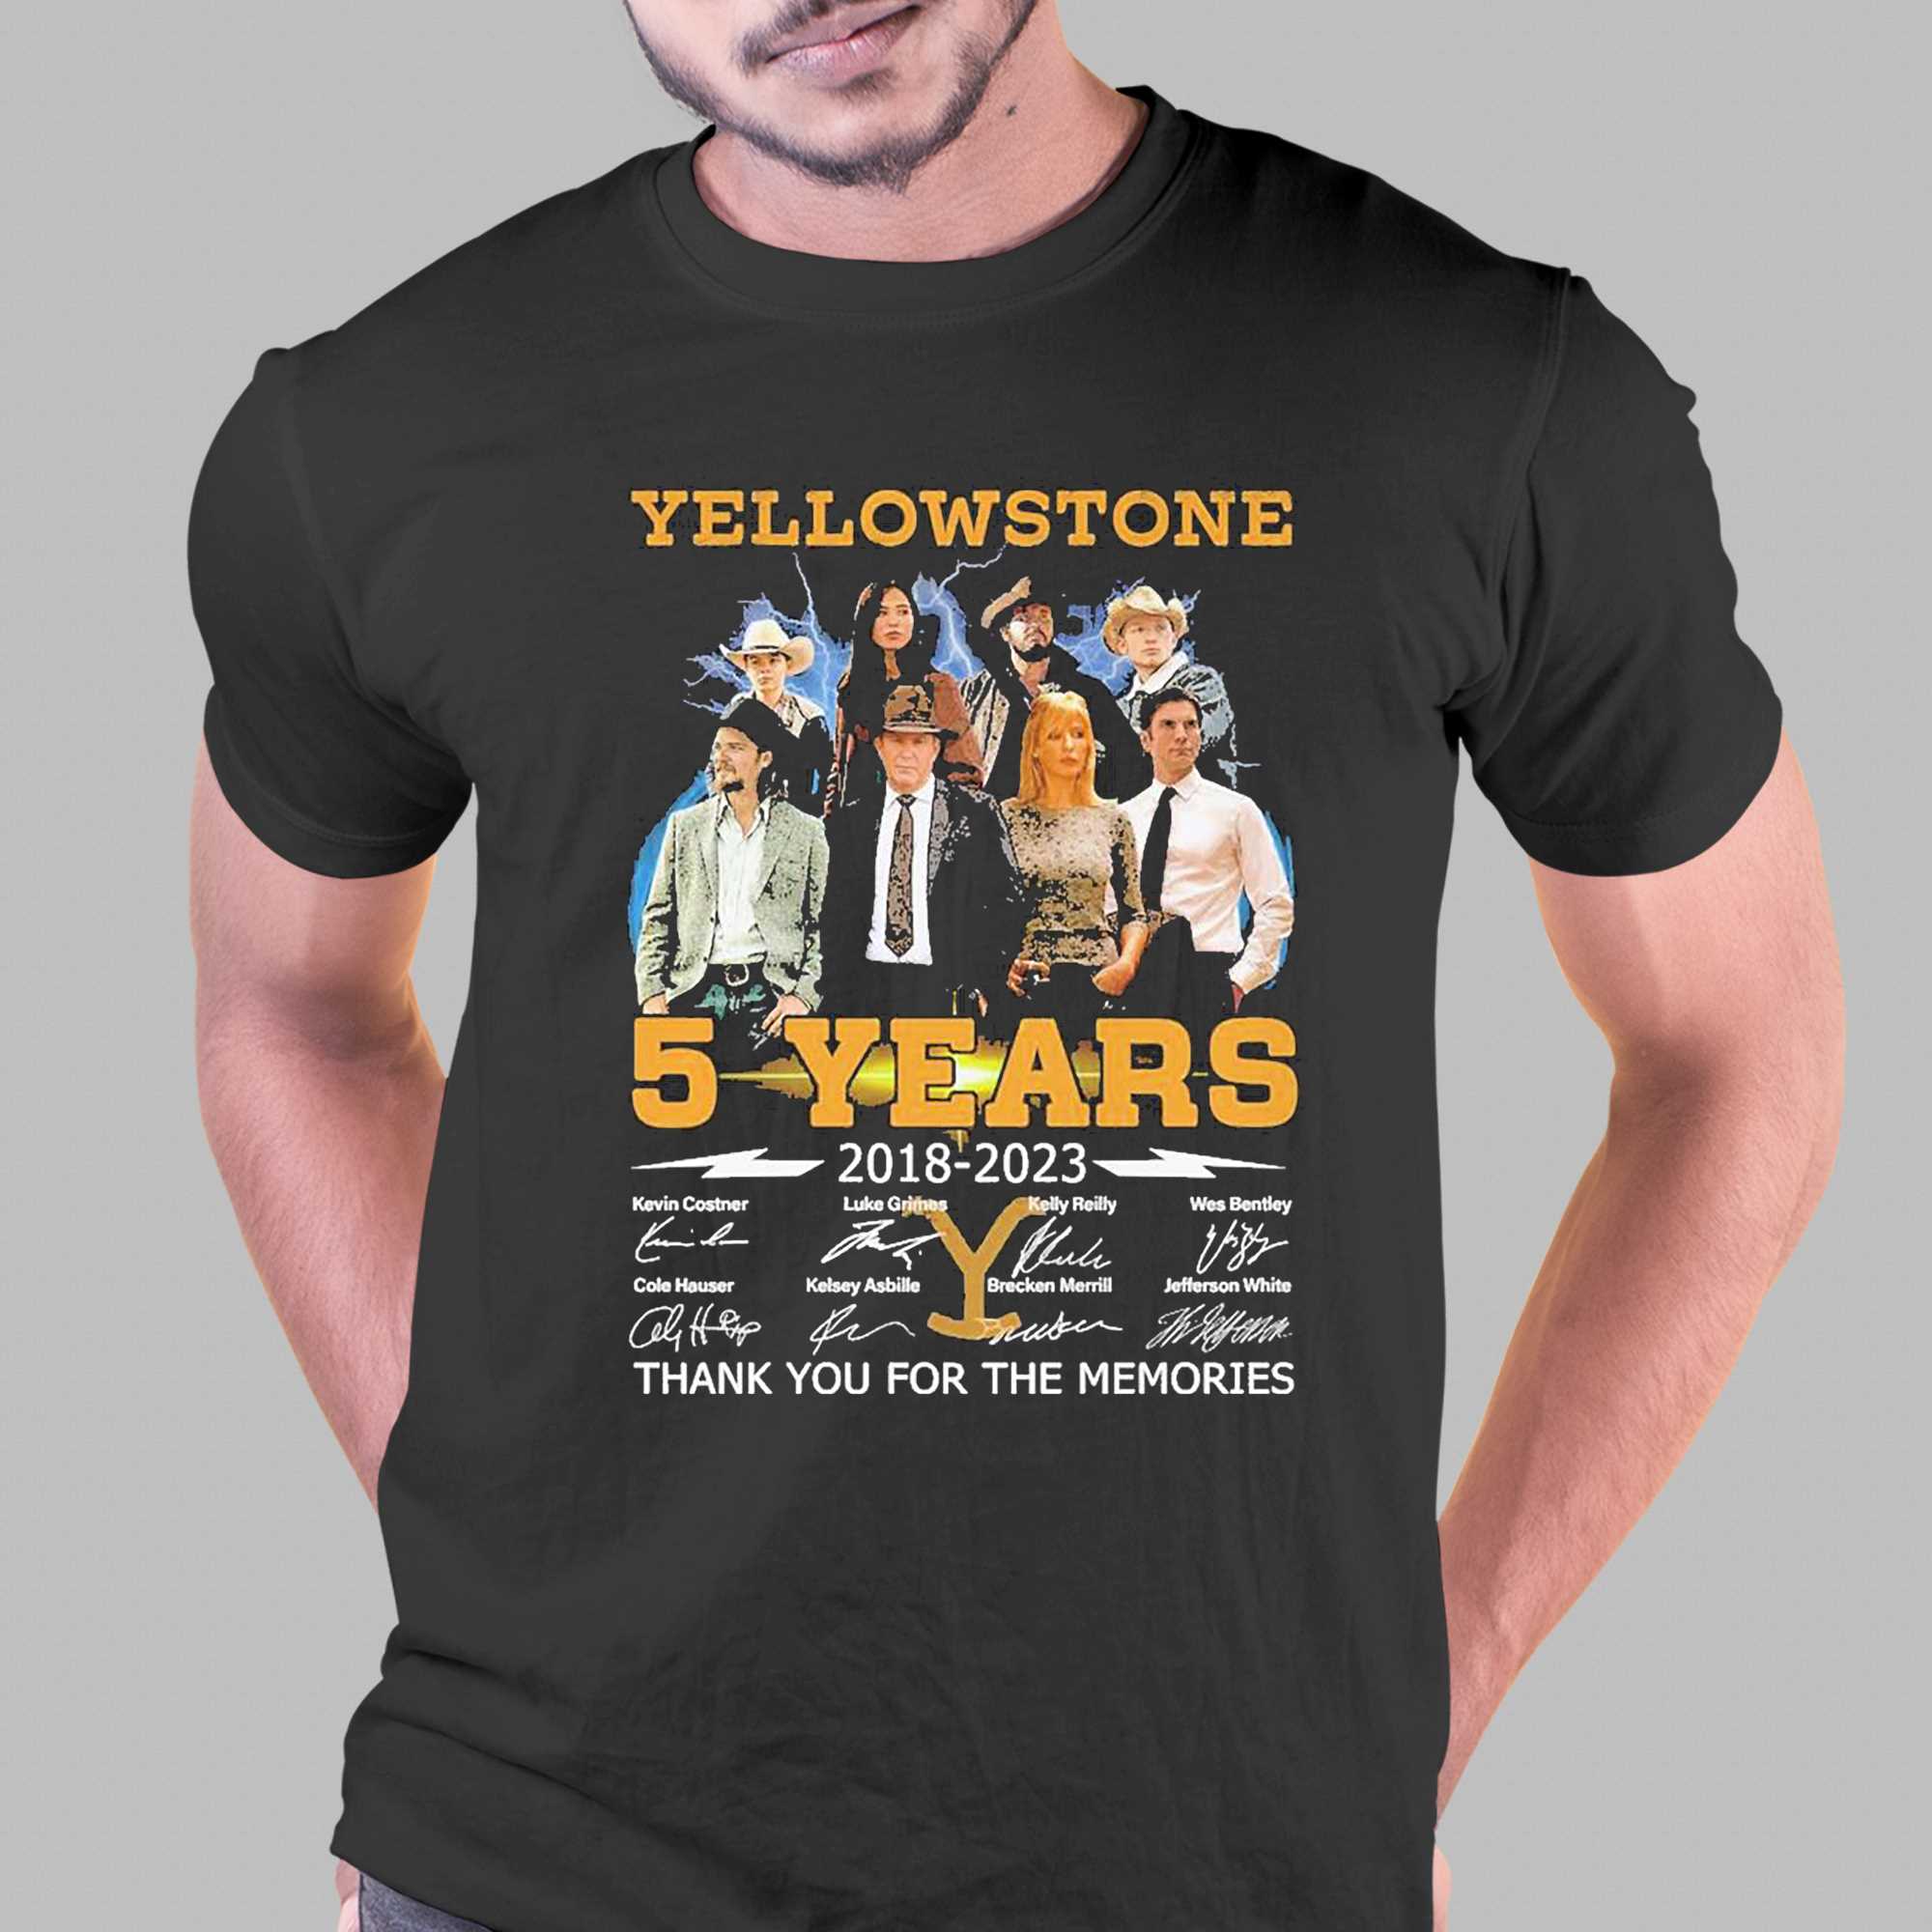 05 Years Anniversary Of Yellowstone 2018-2023 Thank You For The Memories Signatures Shirt 1